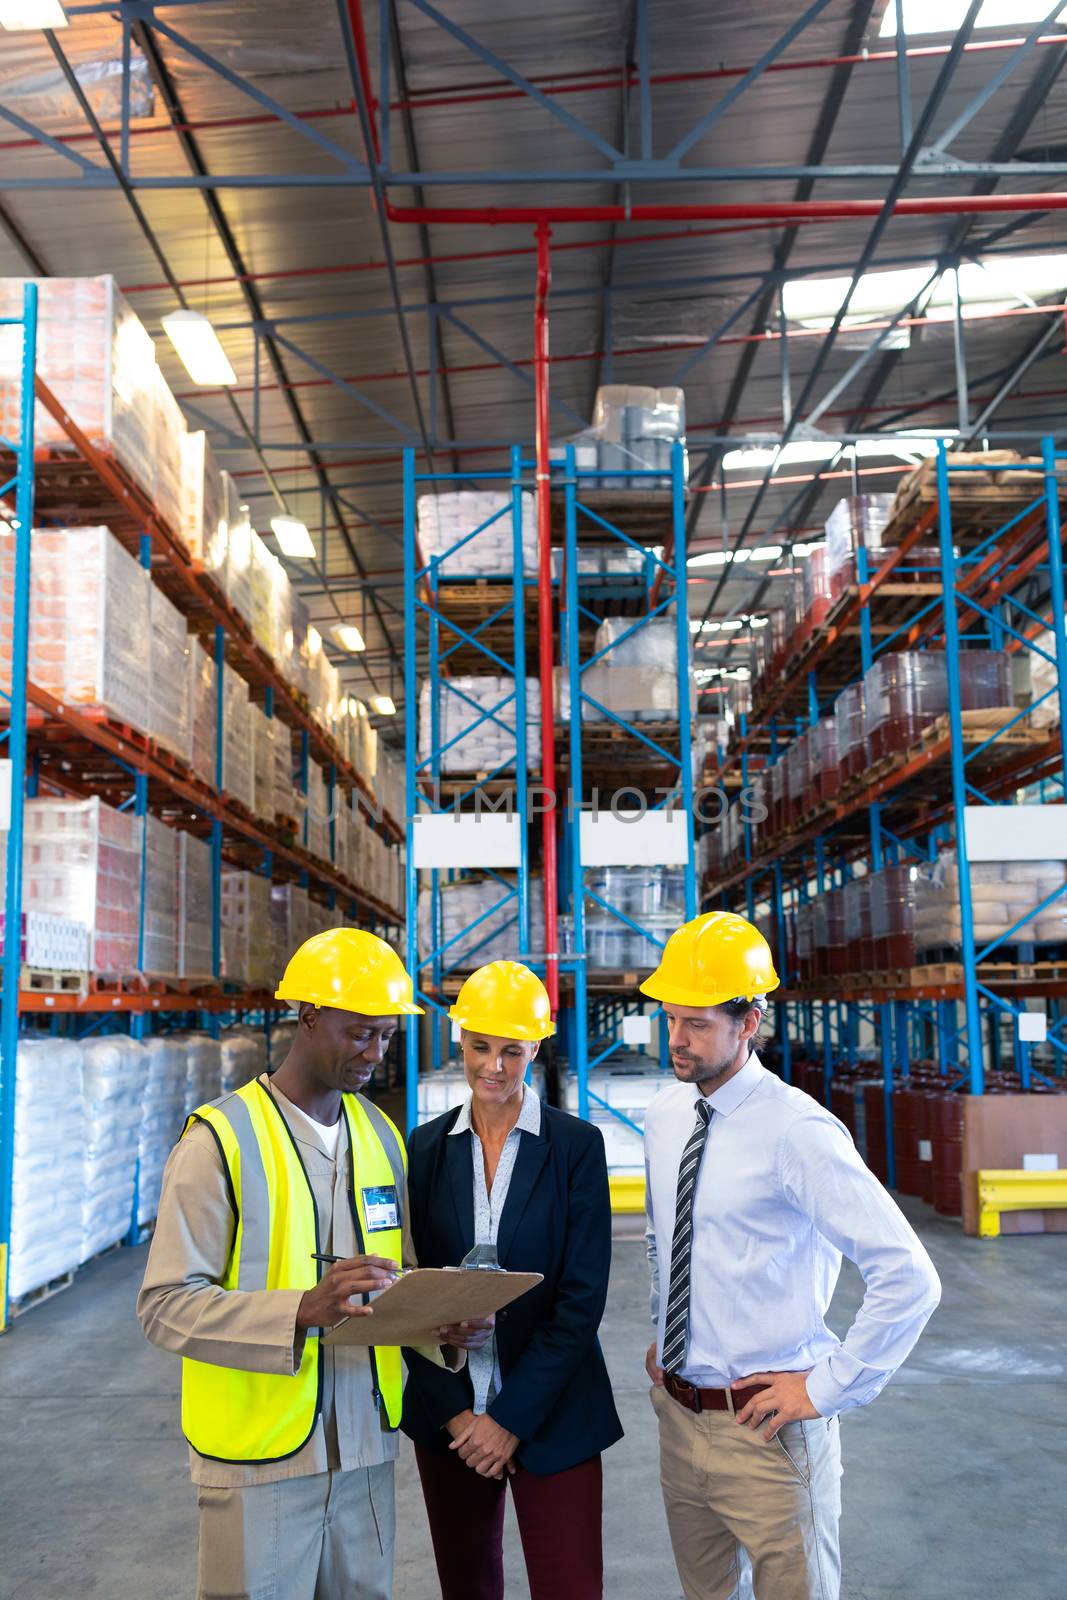 Front view of diverse mature staffs working together on clipboard in warehouse. This is a freight transportation and distribution warehouse. Industrial and industrial workers concept